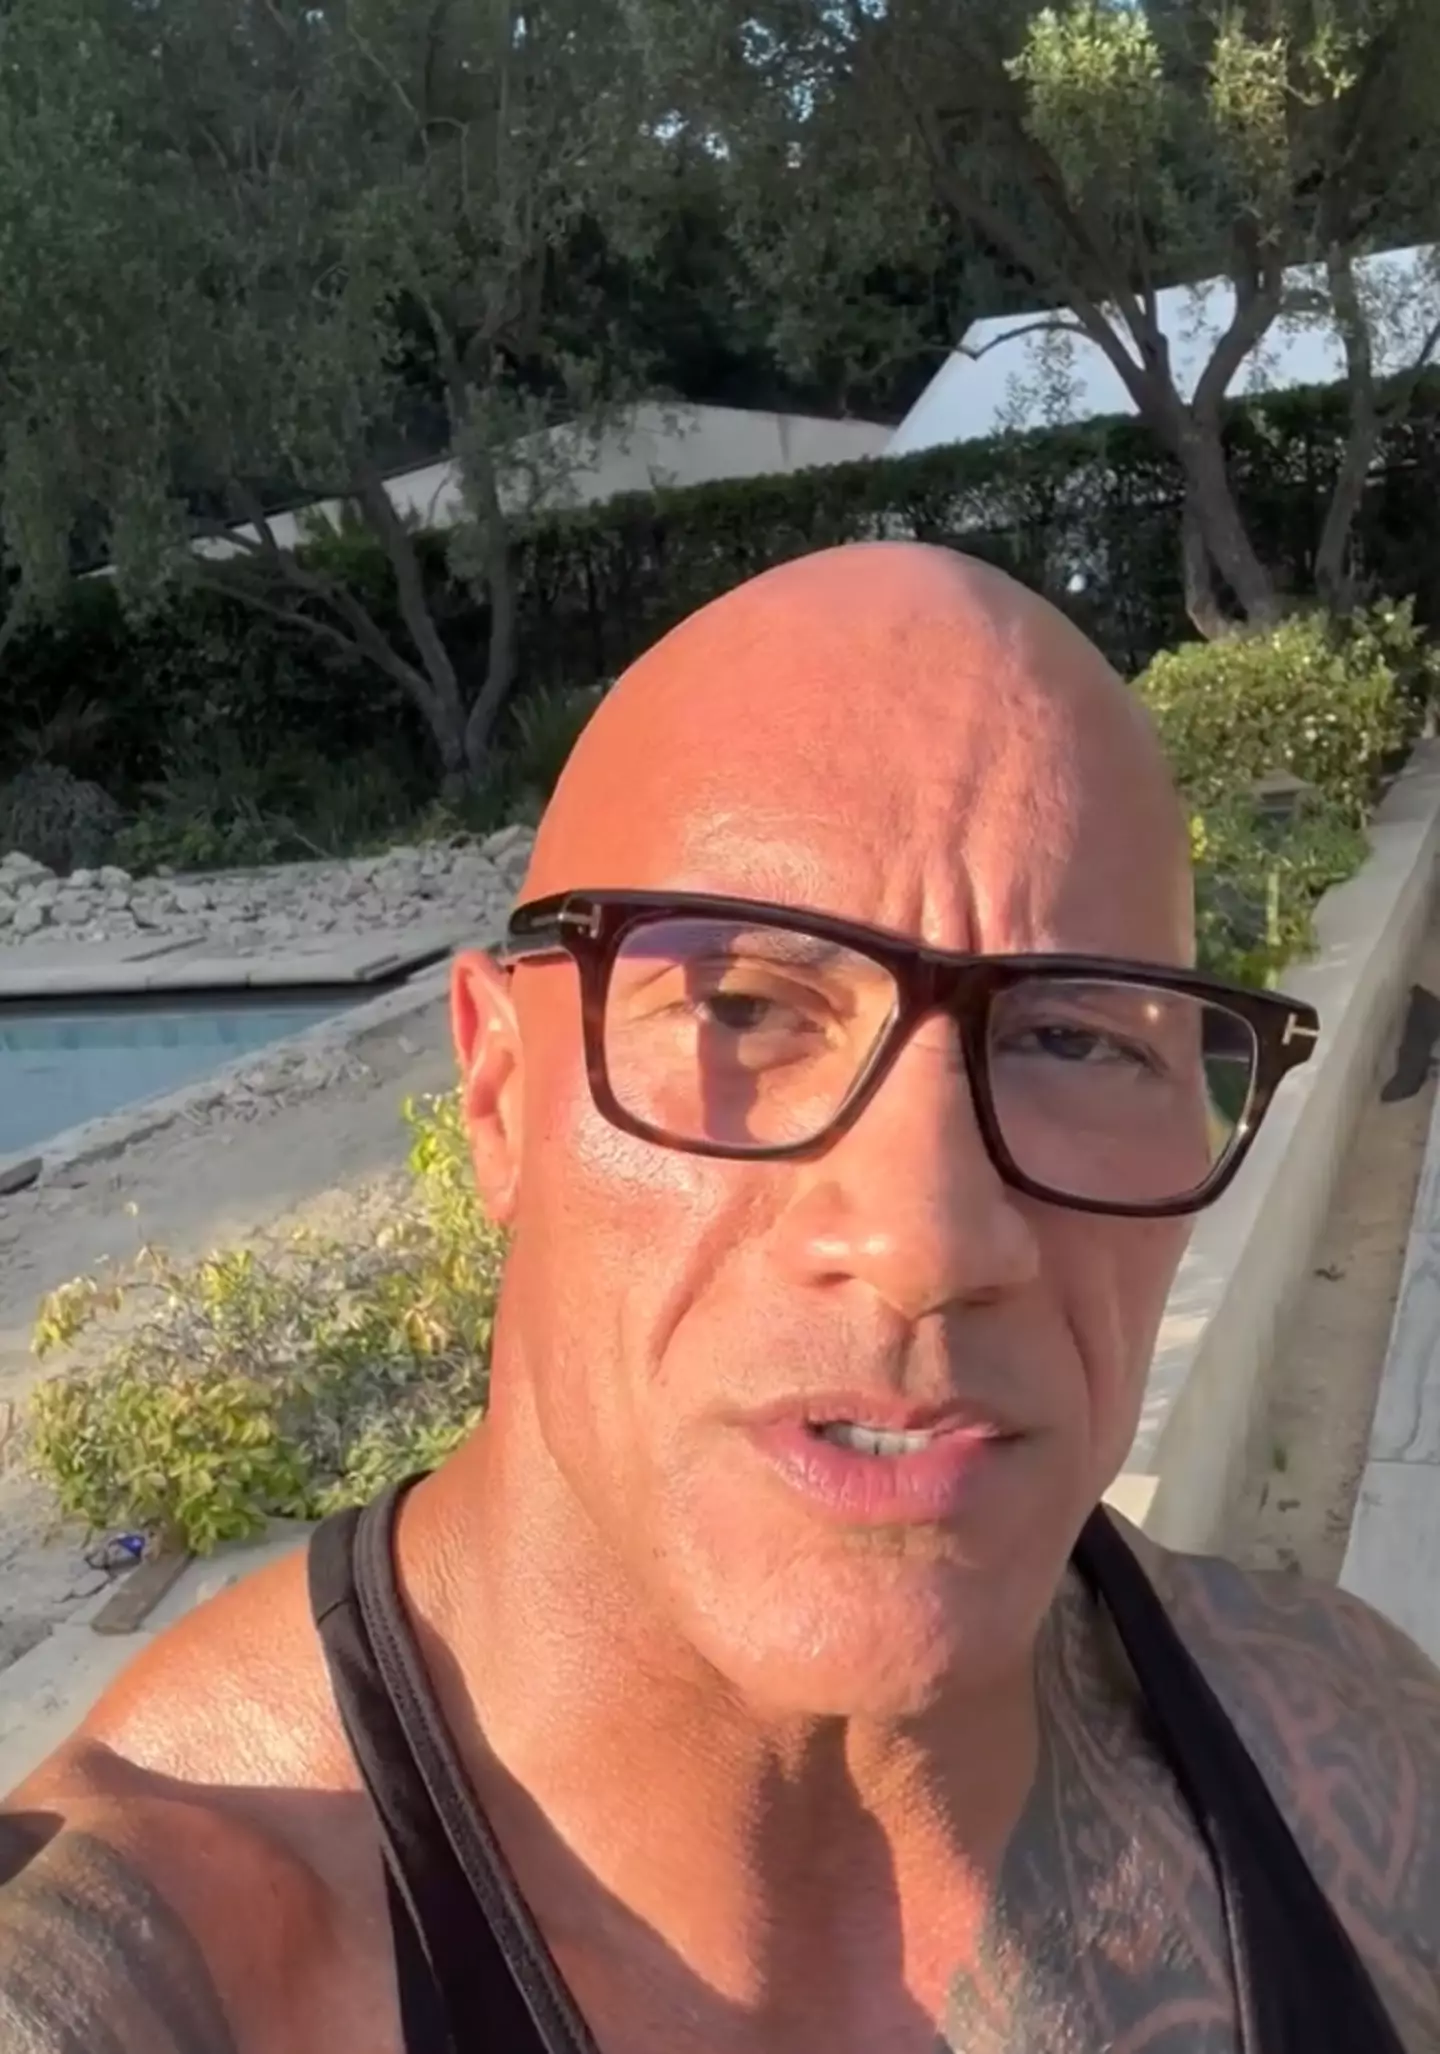 Dwayne Johnson has responded to criticism following the setting up of a fund for Maui.